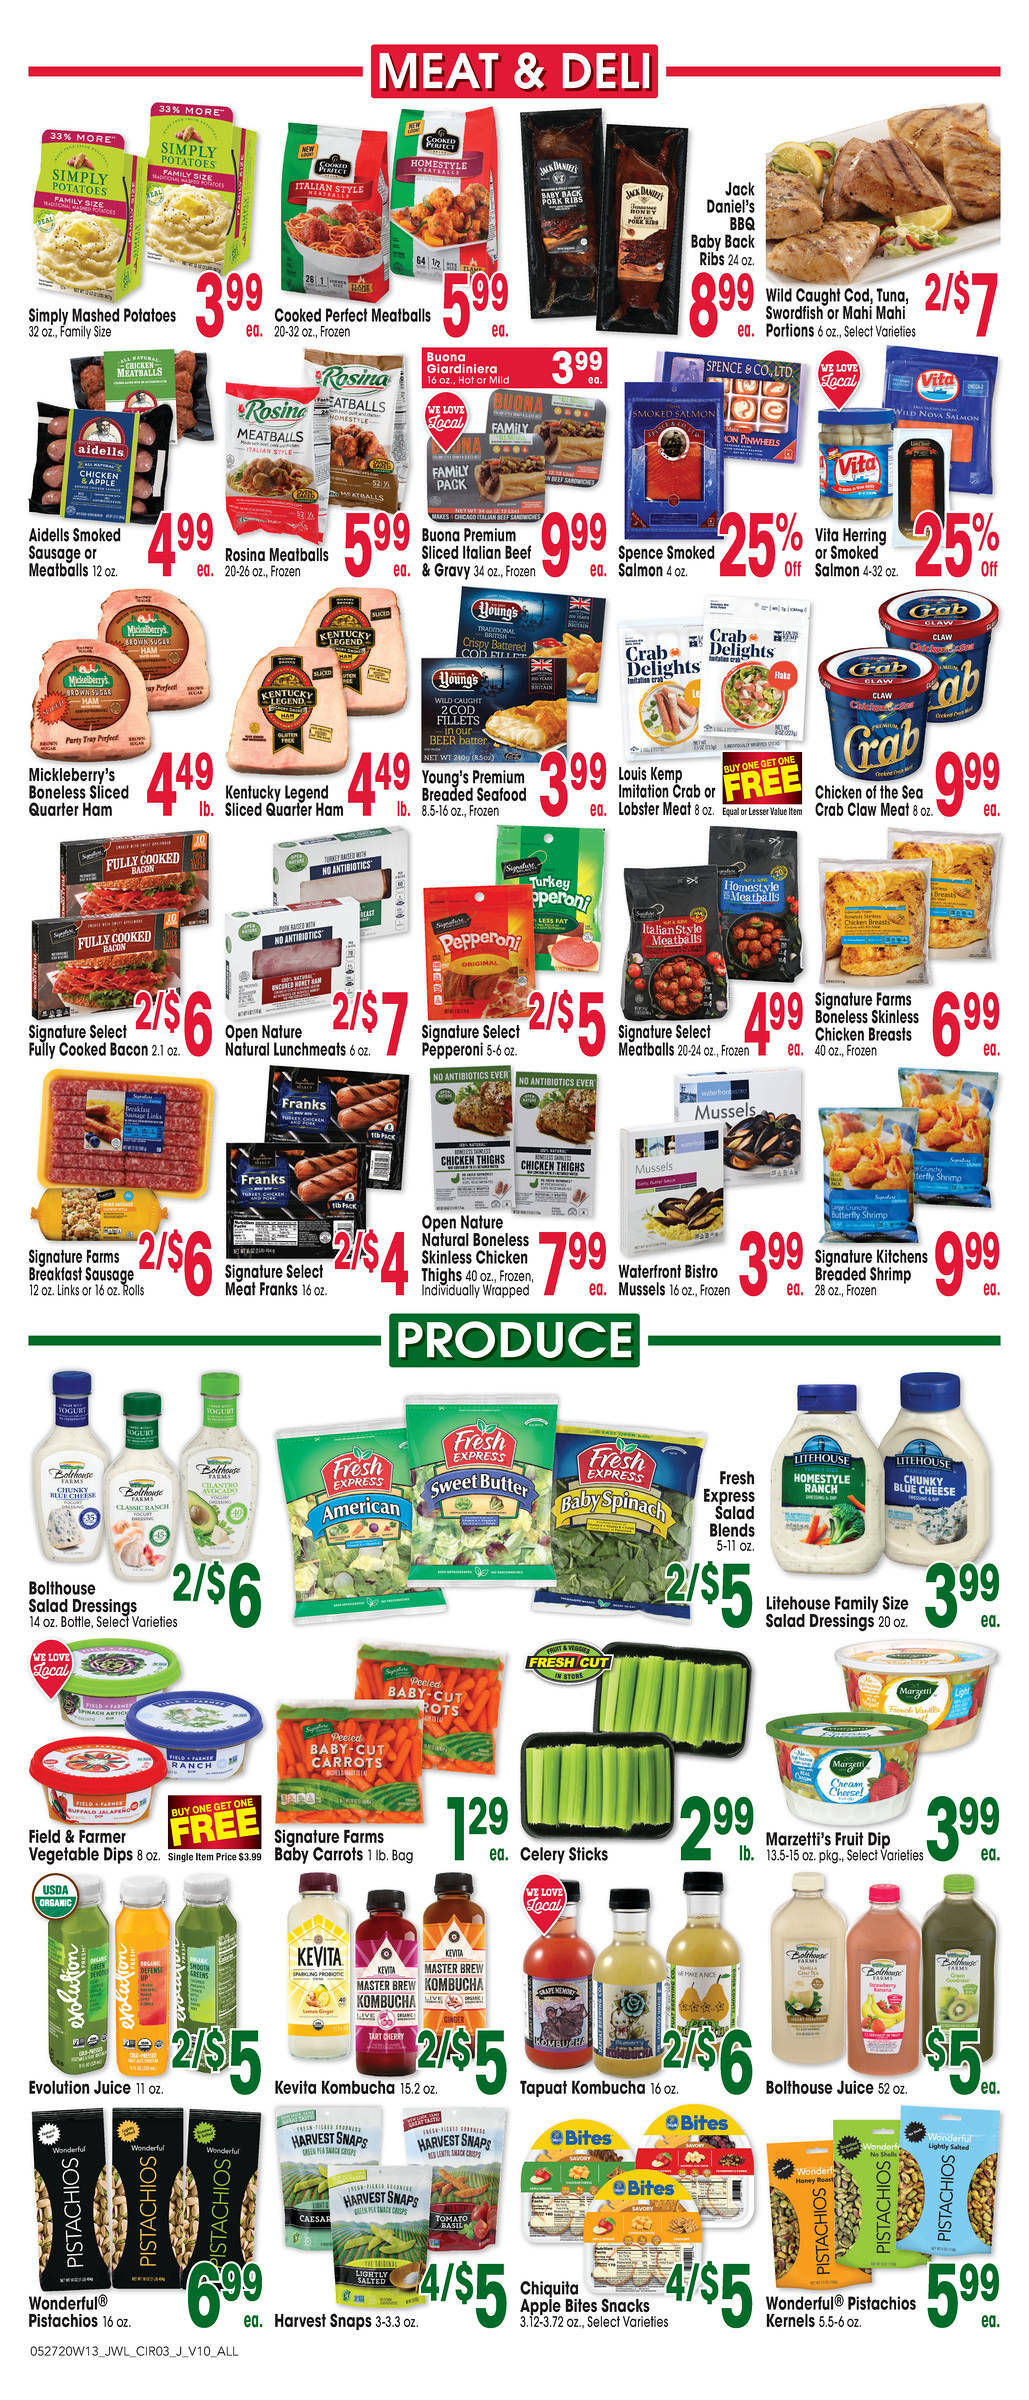 Jewel Osco Weekly Ad from May 27